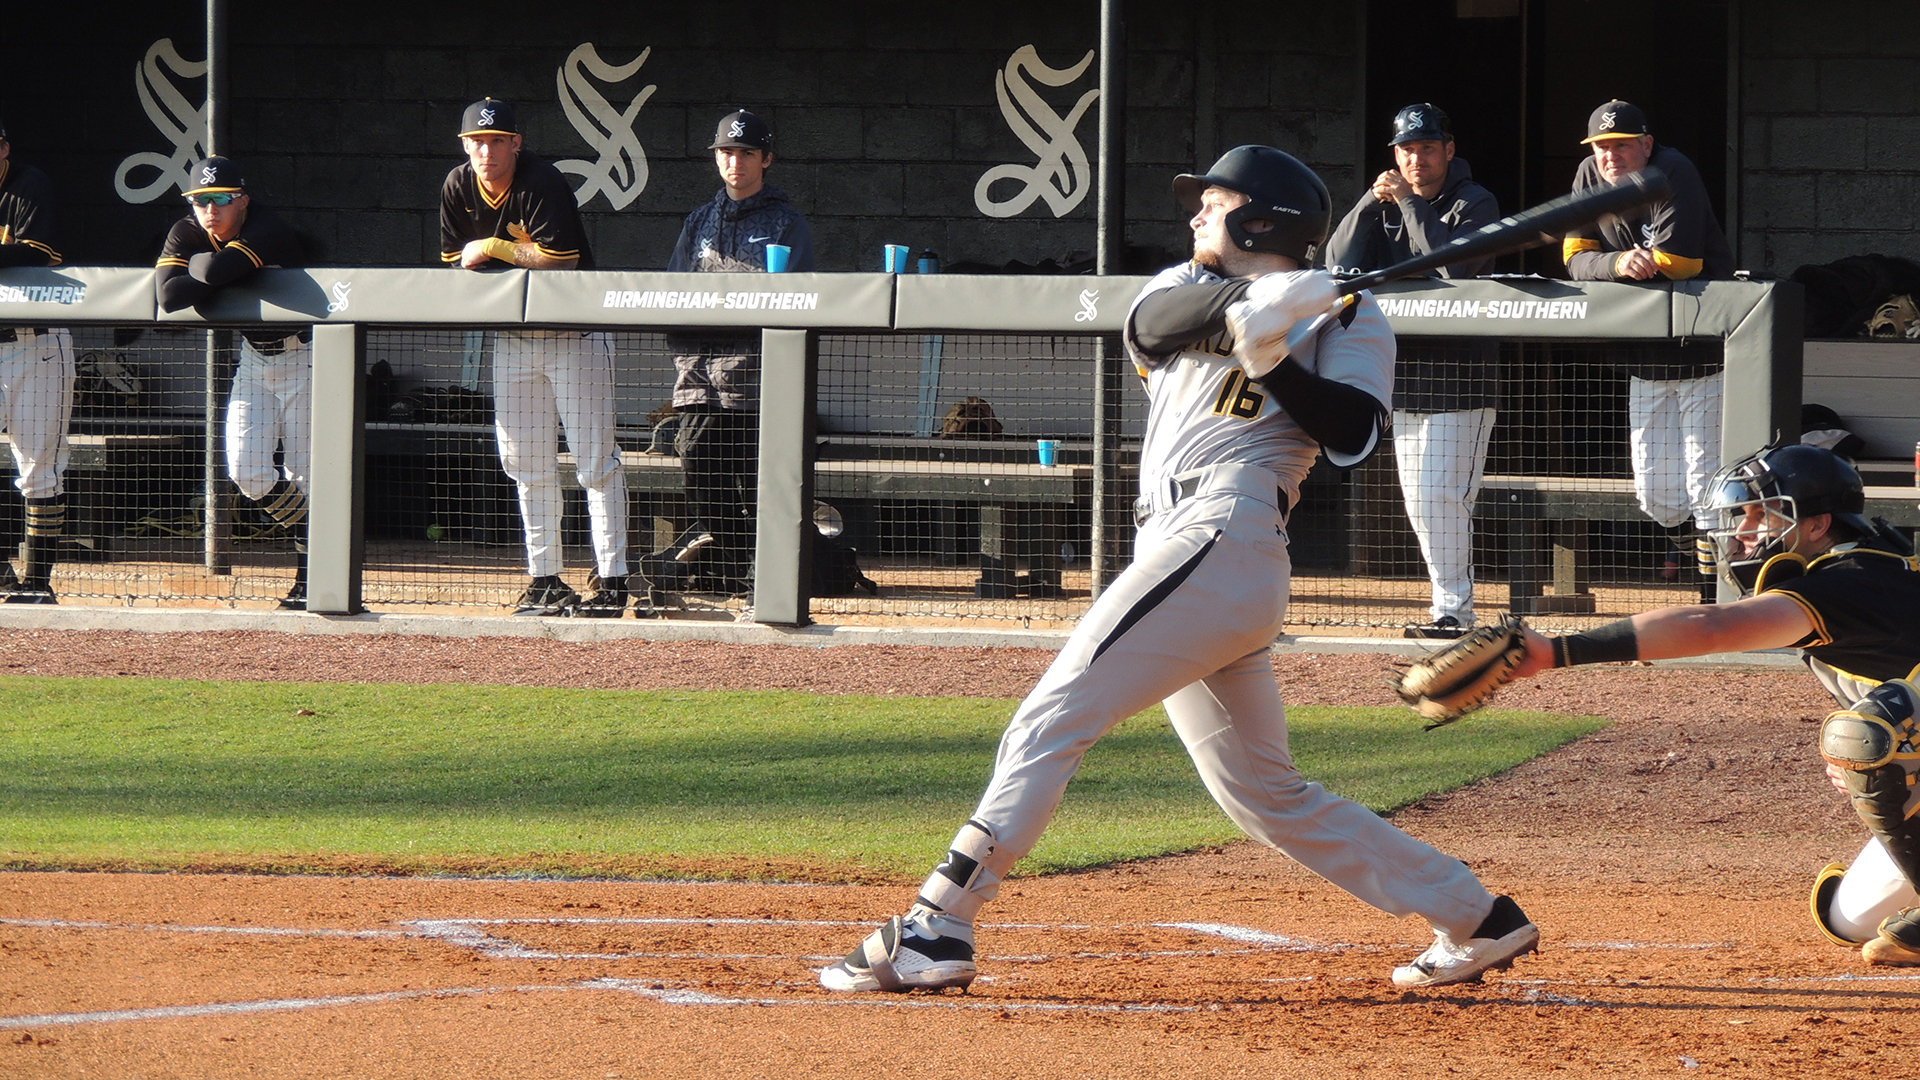 Zach Taylor had two hits against the Panthers, including a first-inning bases-loaded double.